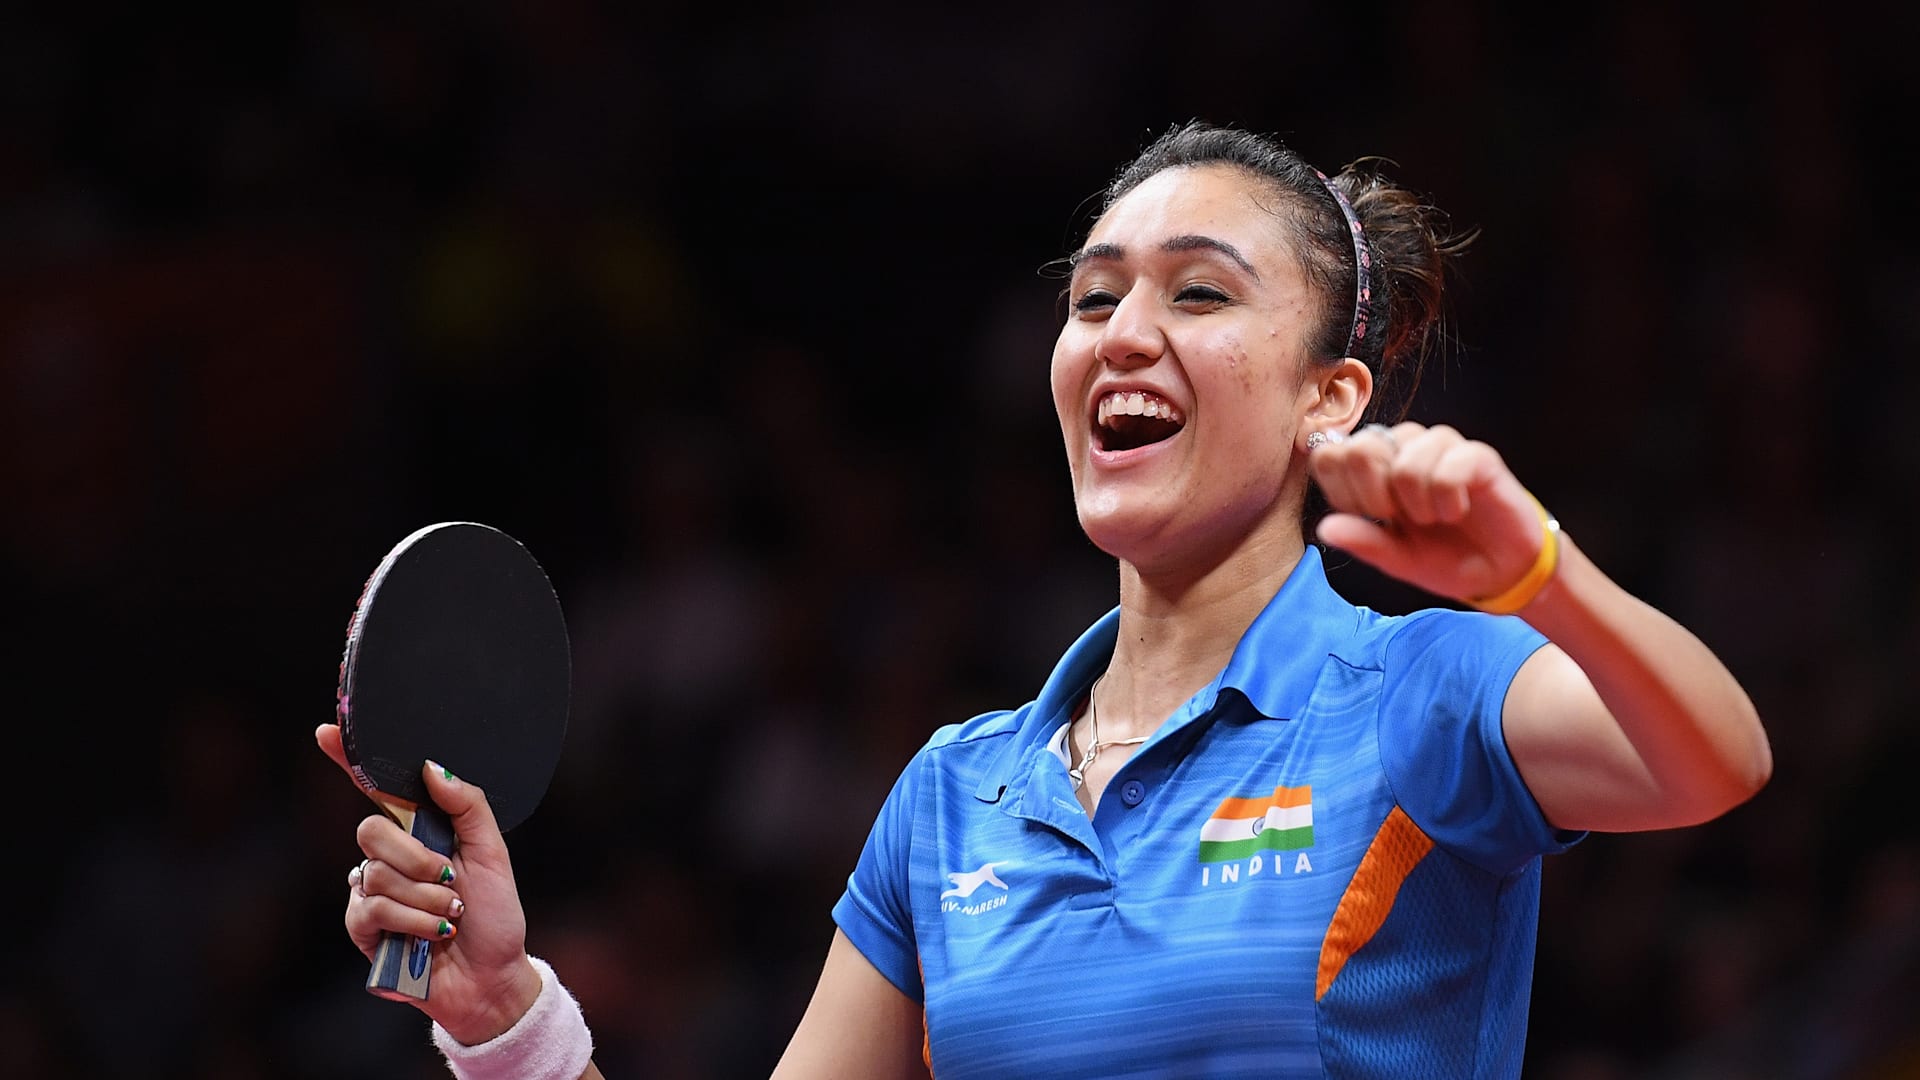 Manika Batra bags her second national table tennis title